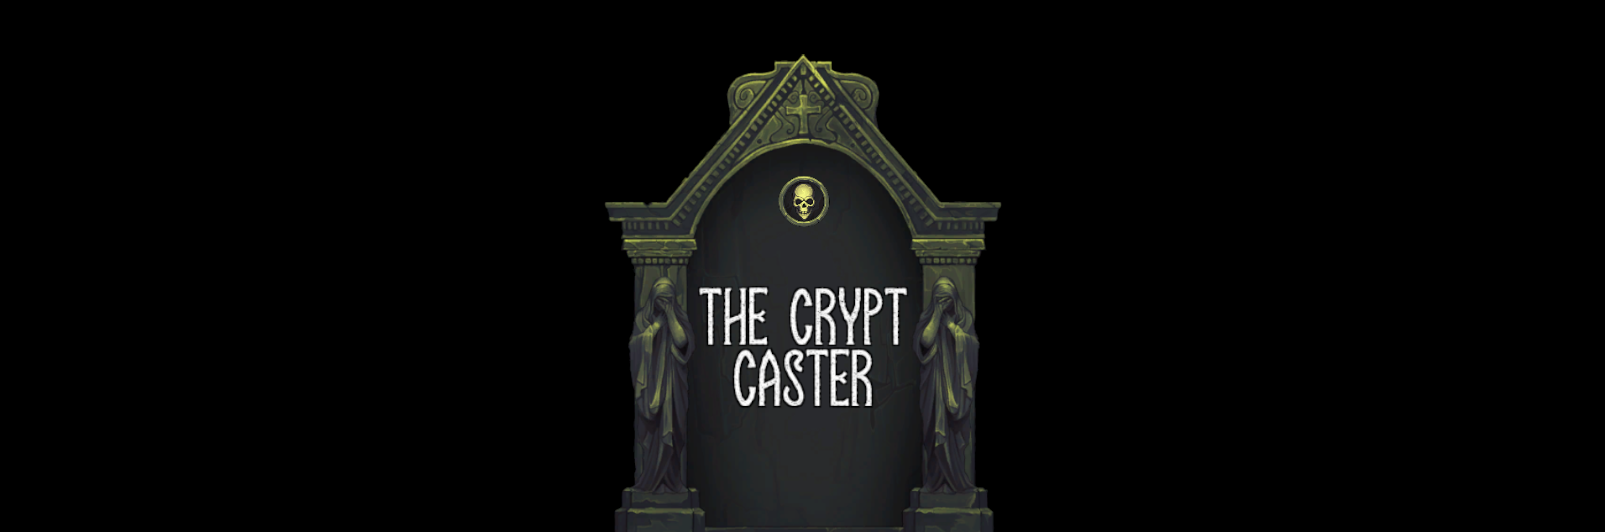 The Crypt Caster